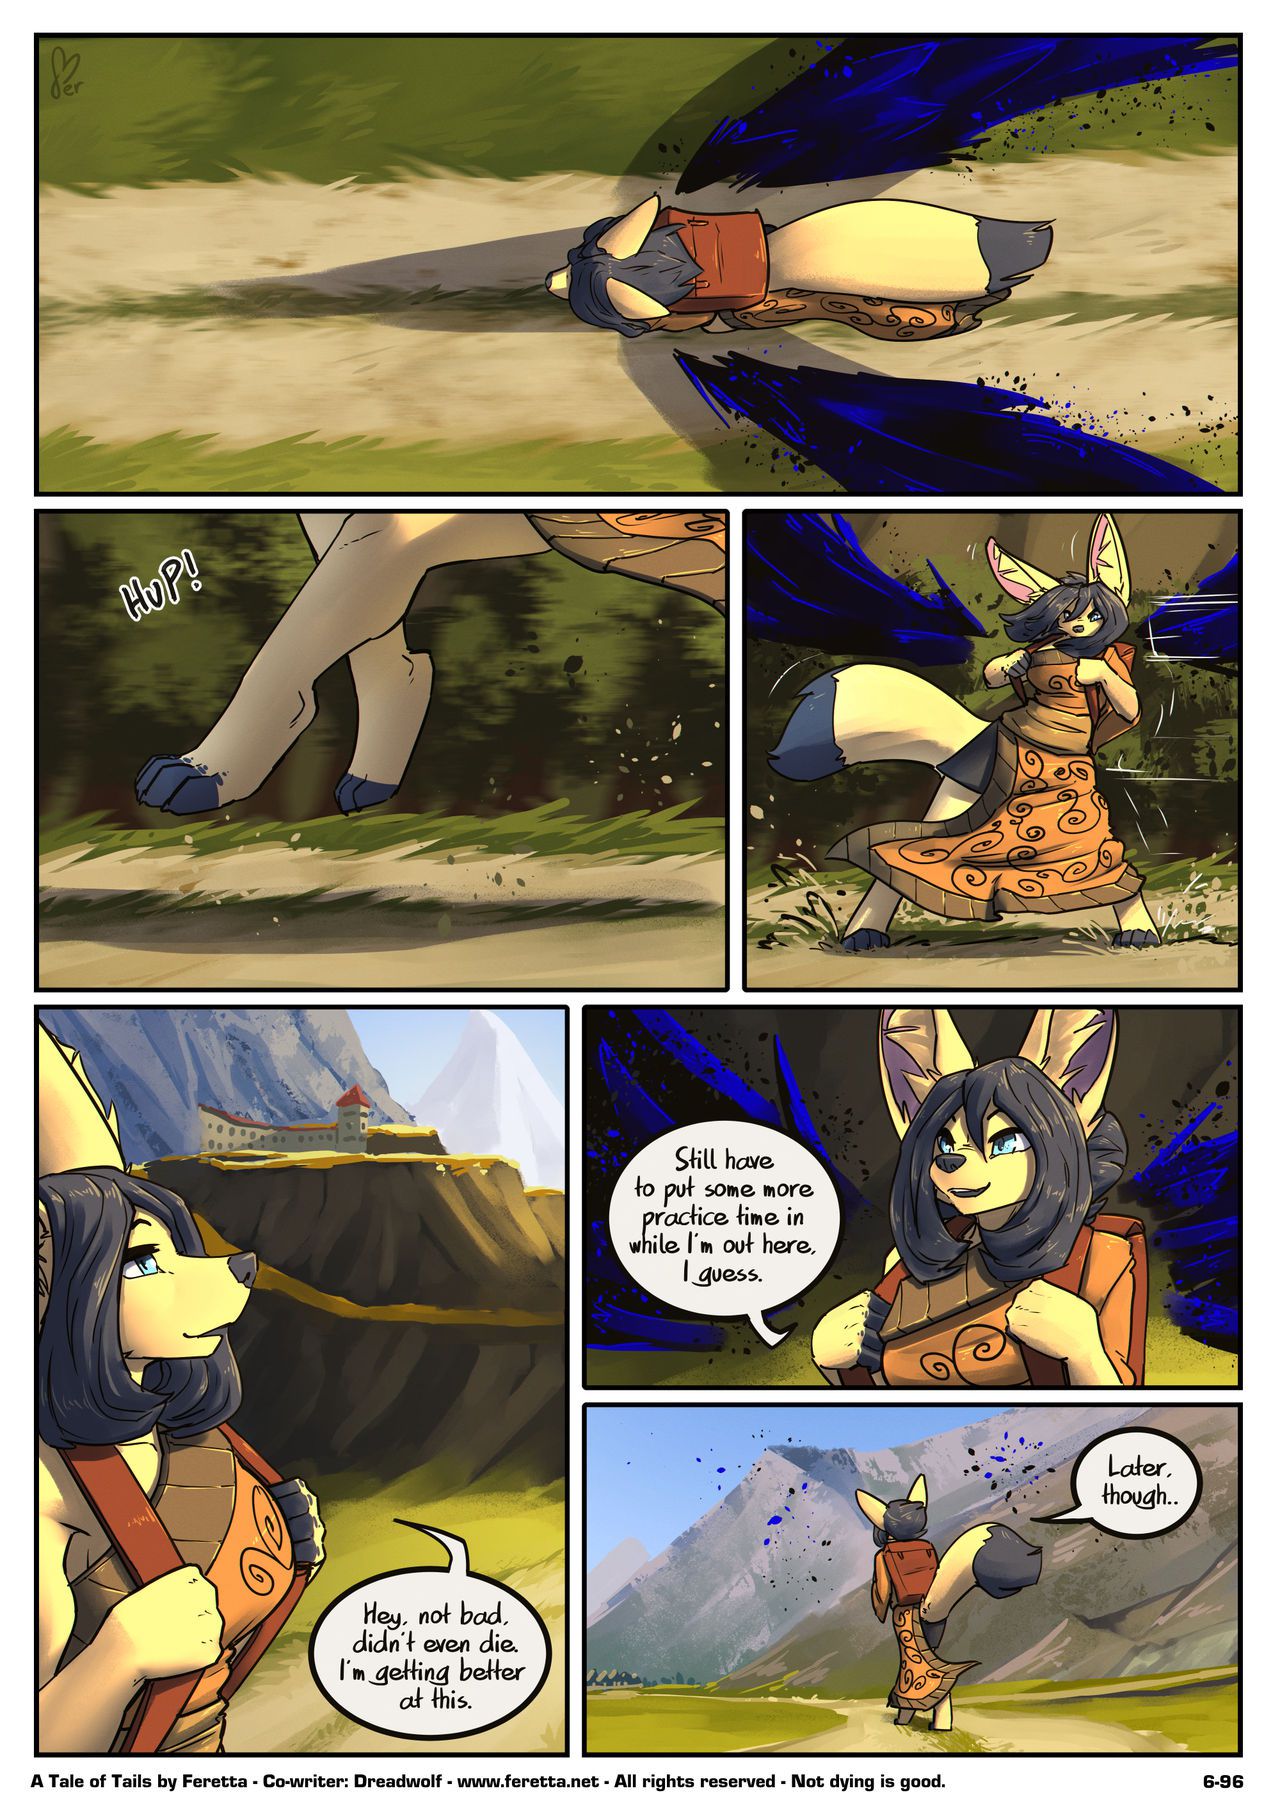 [Feretta] Farellian Legends: A Tale of Tails (w/Extras) [Ongoing] 391